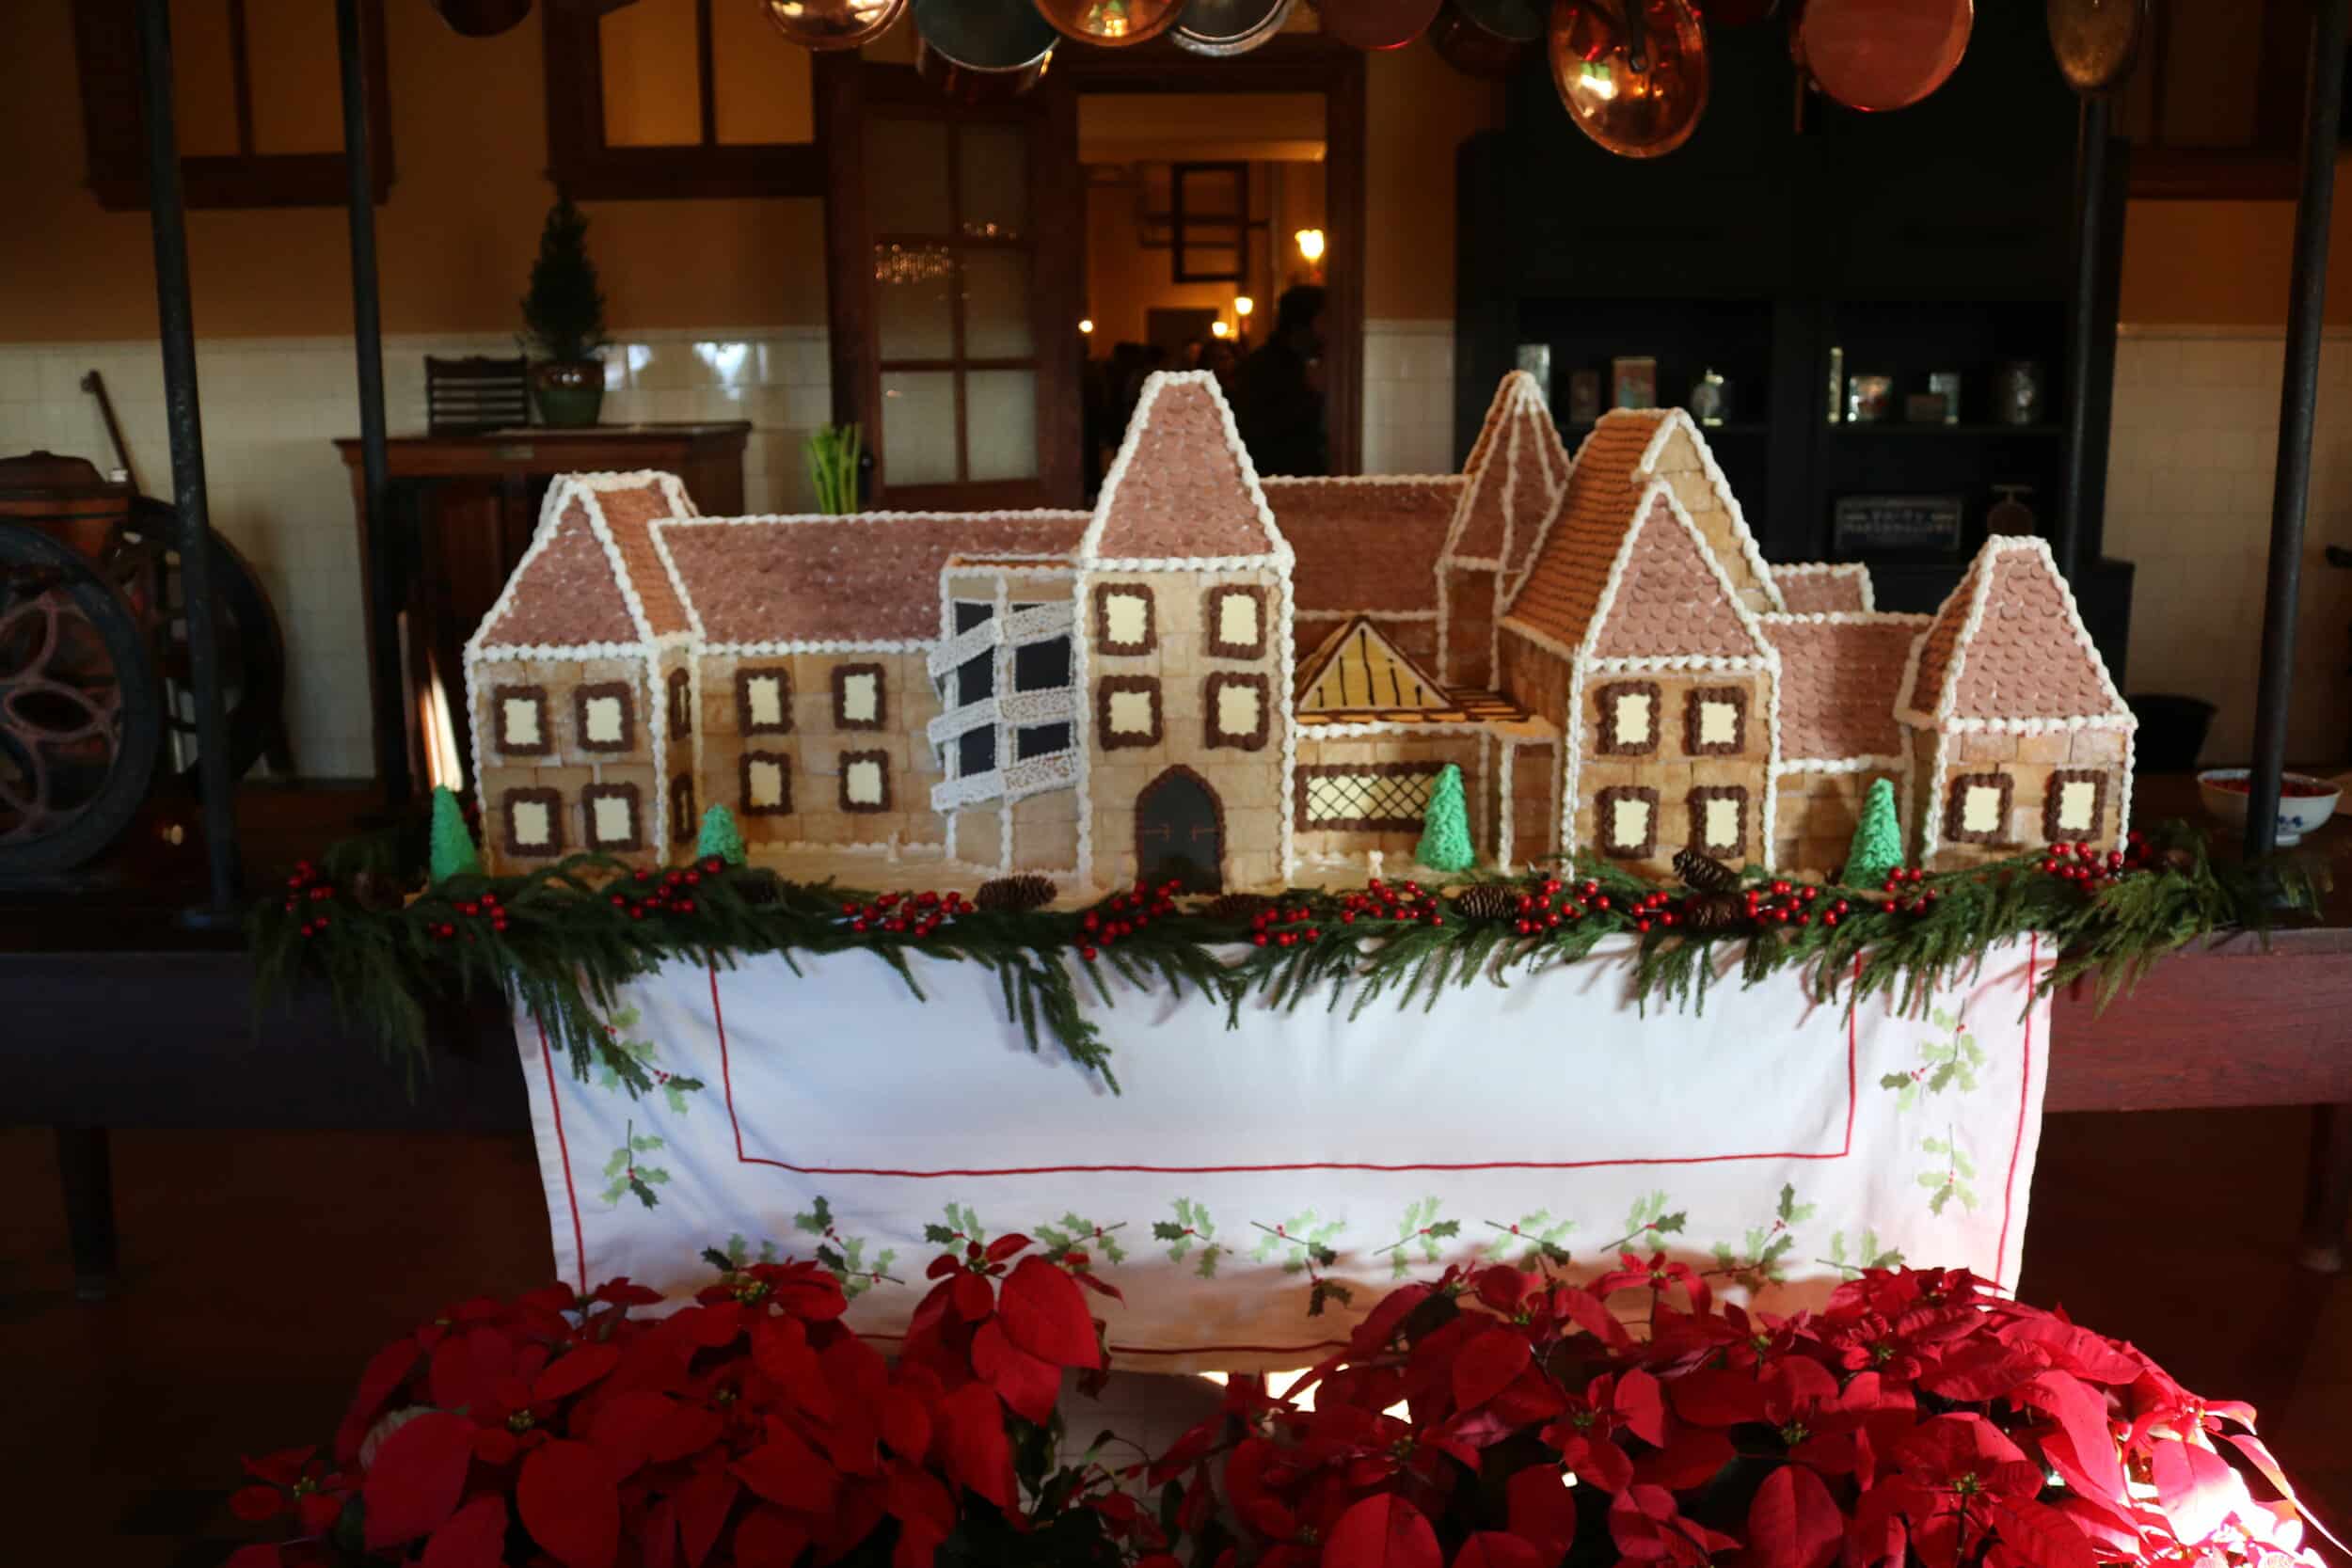 The Biltmore made into a giant gingerbread house that was on display in the houses main kitchen downstairs.